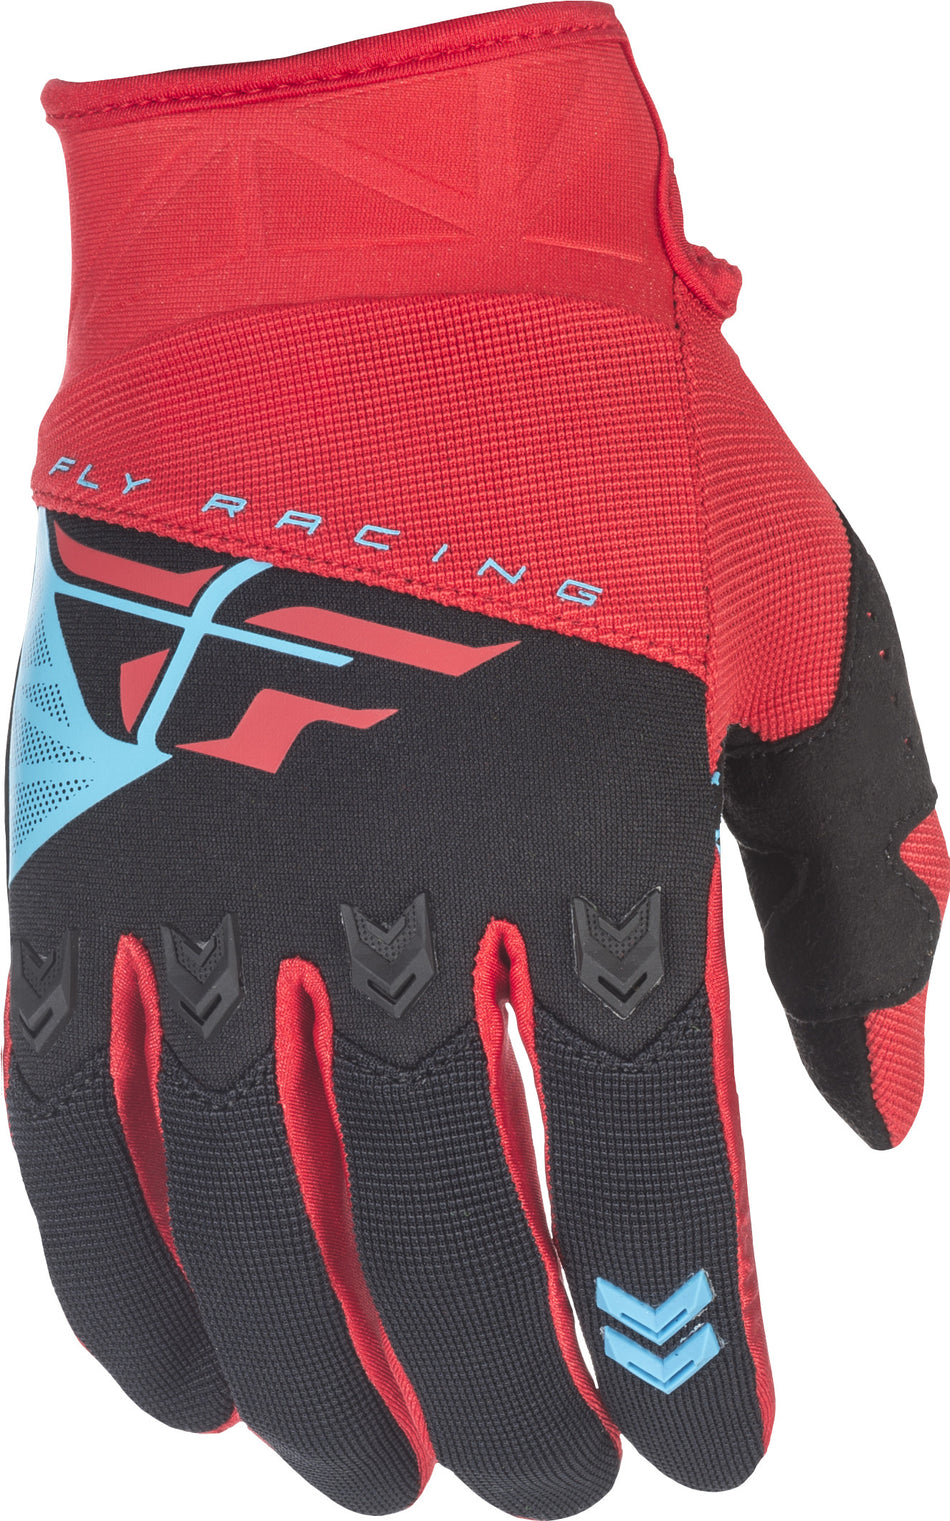 FLY RACING F-16 Gloves Red/Black Sz 10 371-91210